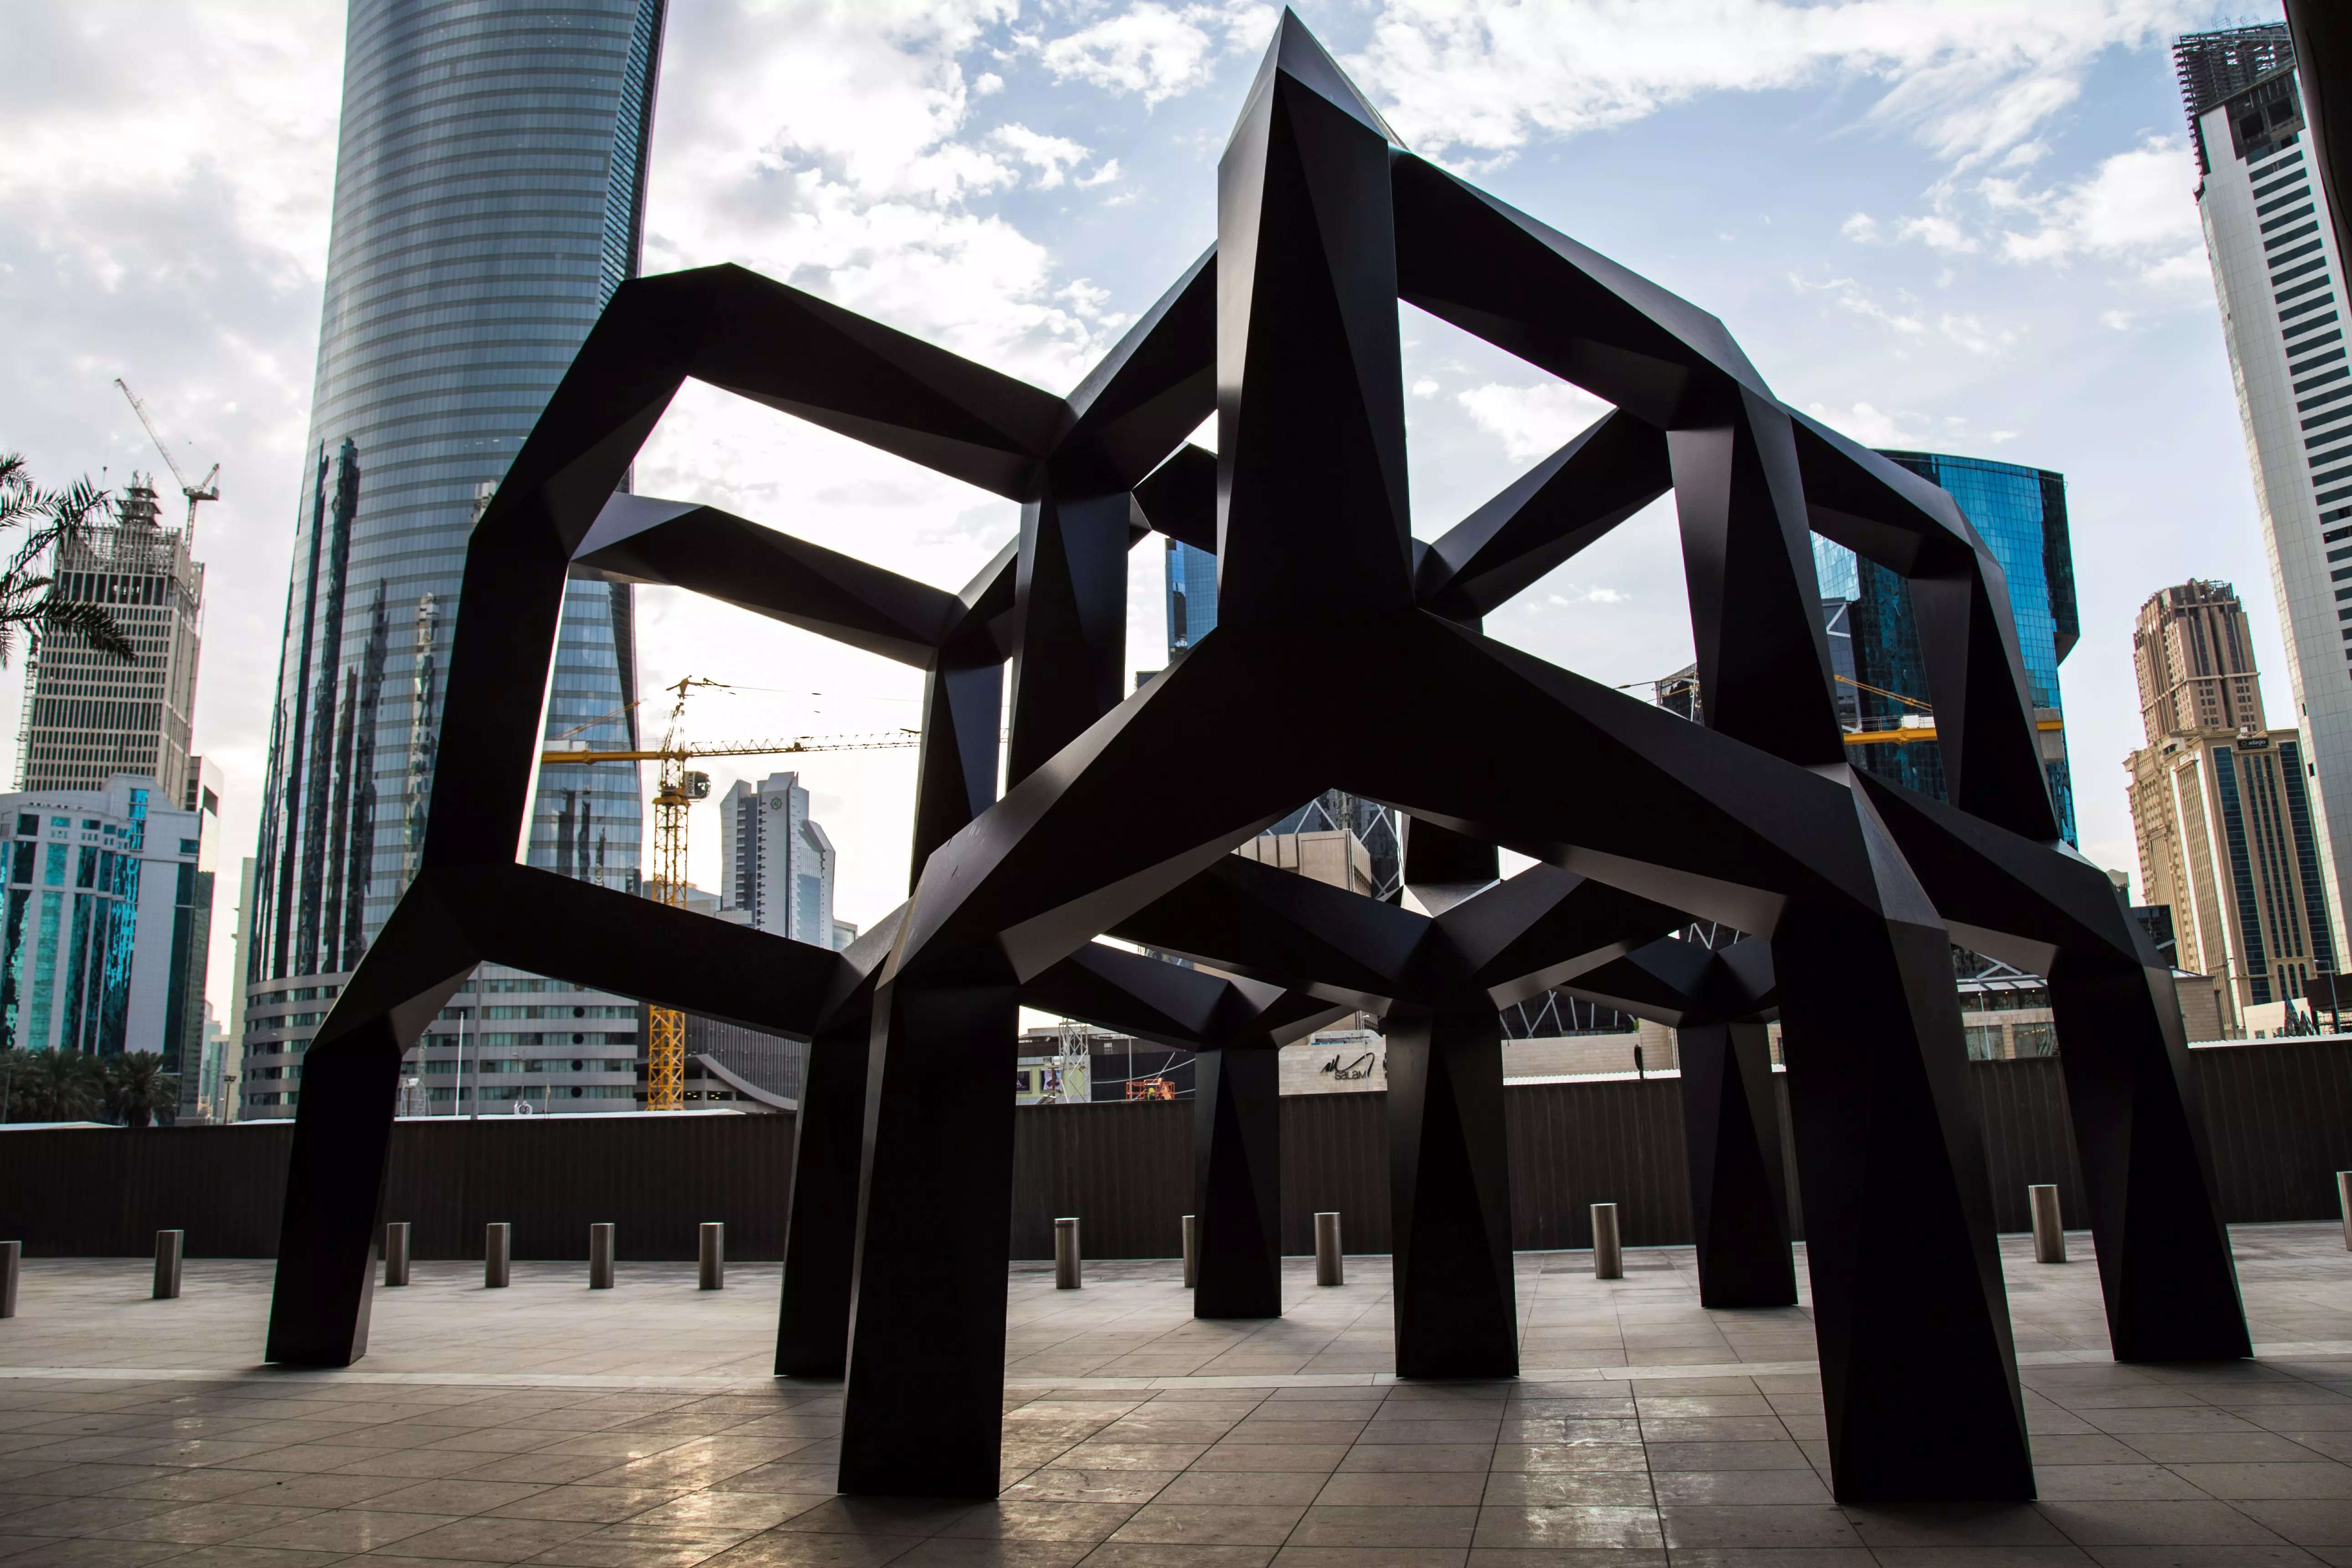 Public art installations in Qatar that you would not want to miss